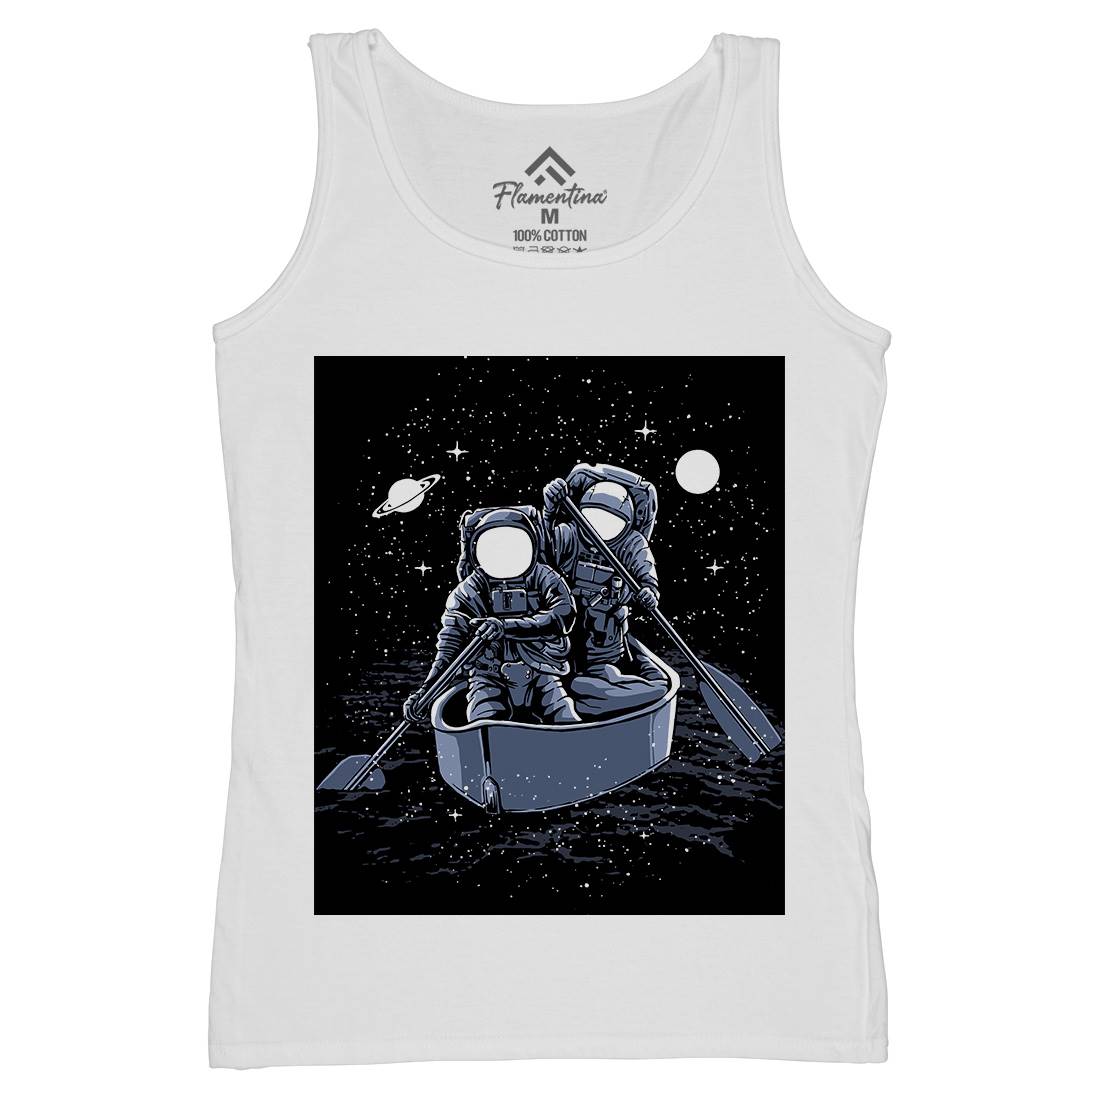 Across The Galaxy Womens Organic Tank Top Vest Space A501